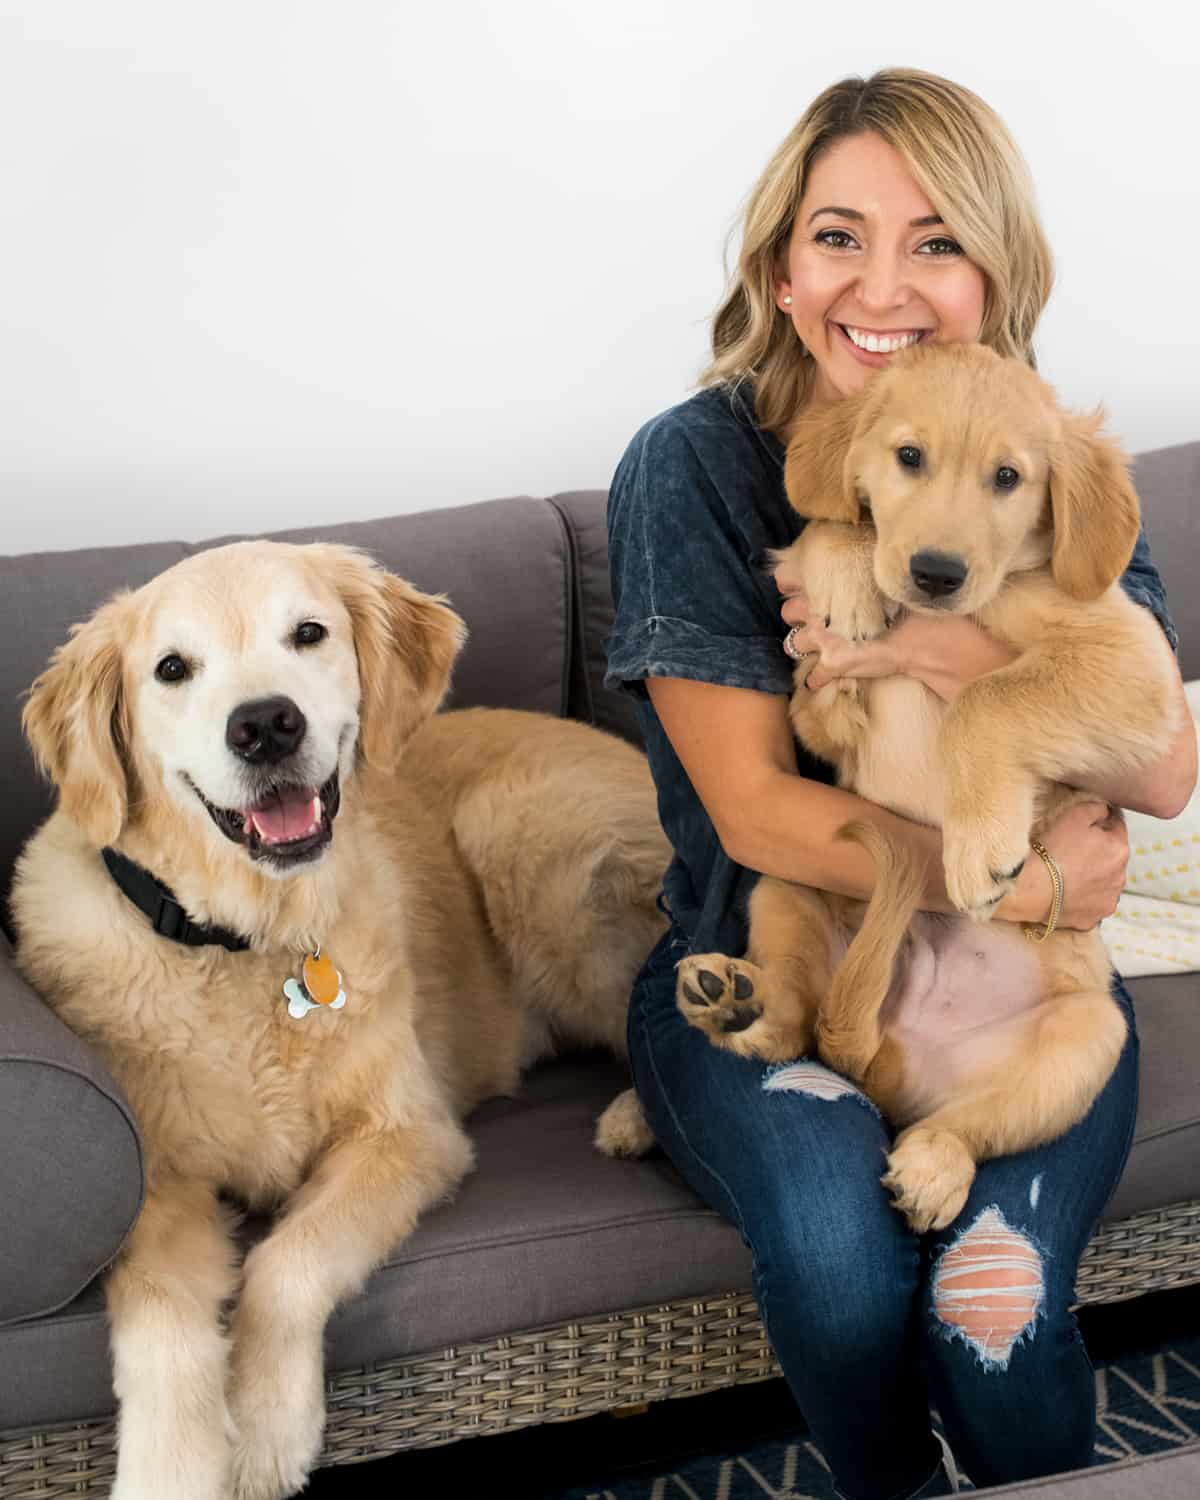 Woman with two dogs on a couch after needing pet insurance.